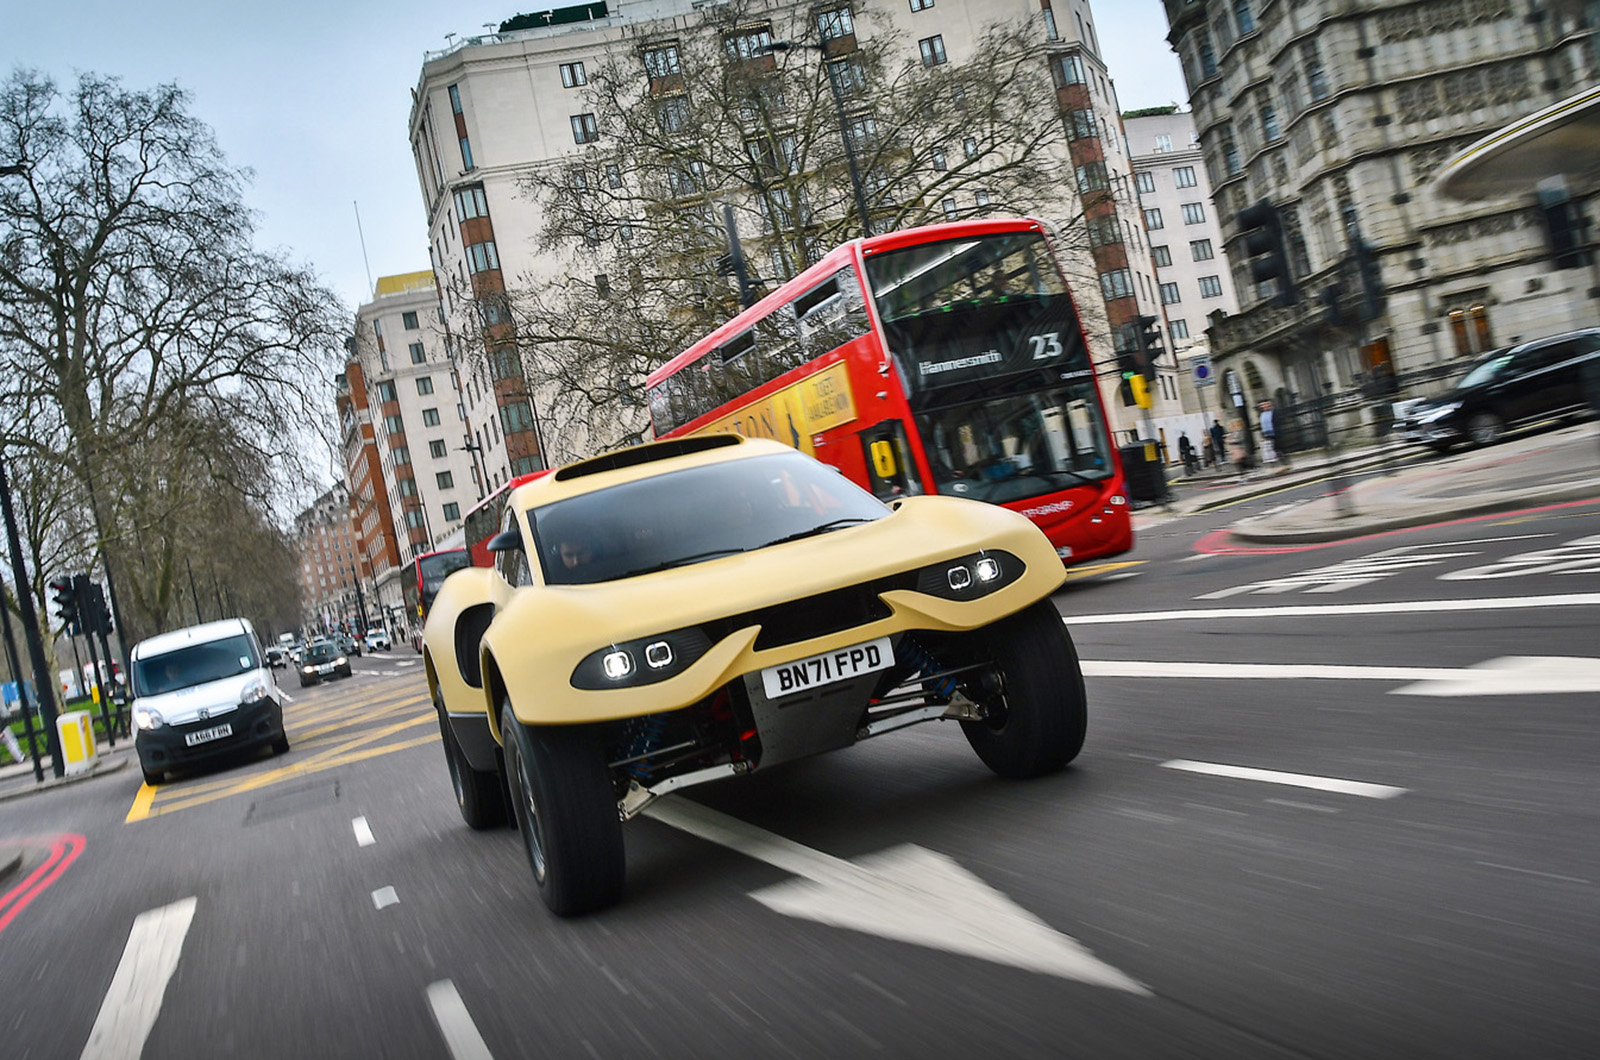 Chelsea Tractor Ultimate: Prodrive Hunter trifft auf Central London